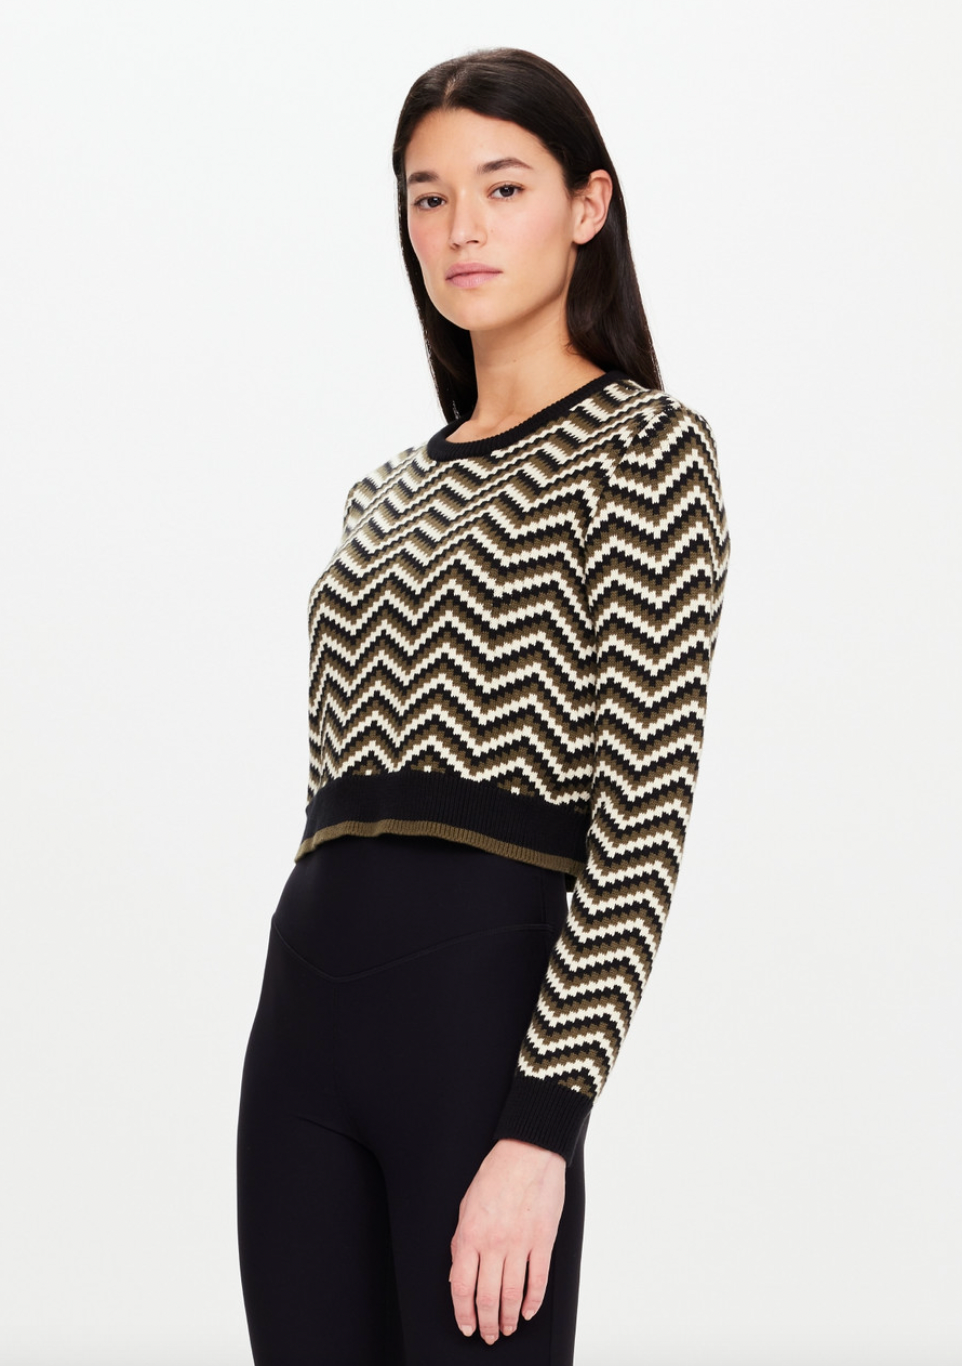 Product Image for Ziggy Karlie Knit Top, Multi